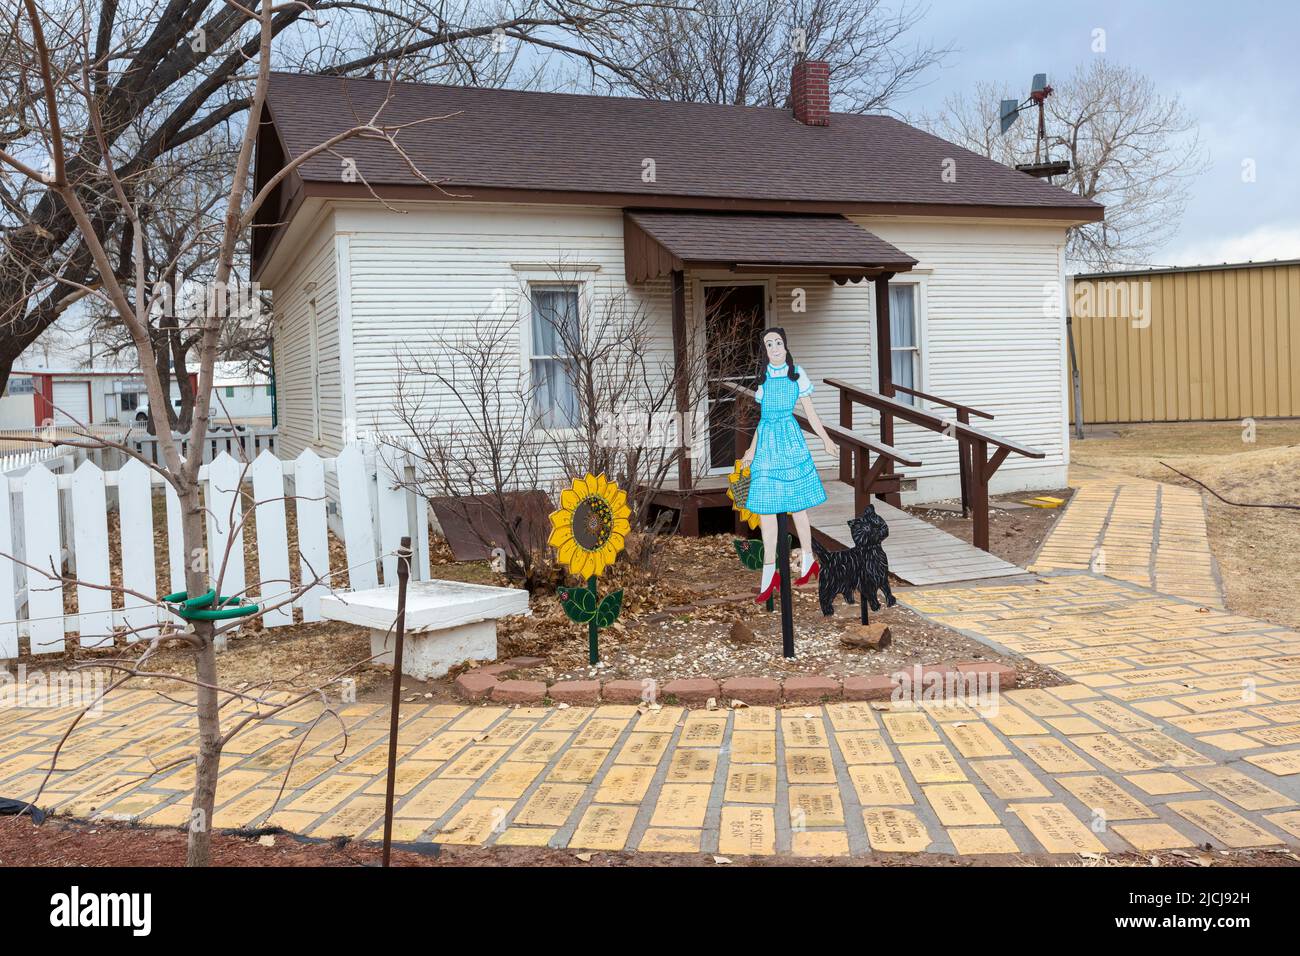 Liberal, Kansas - Dorothy's House and the Land of Oz, a tourist attraction modeled after the 1939 movie, The Wizard of Oz. Stock Photo